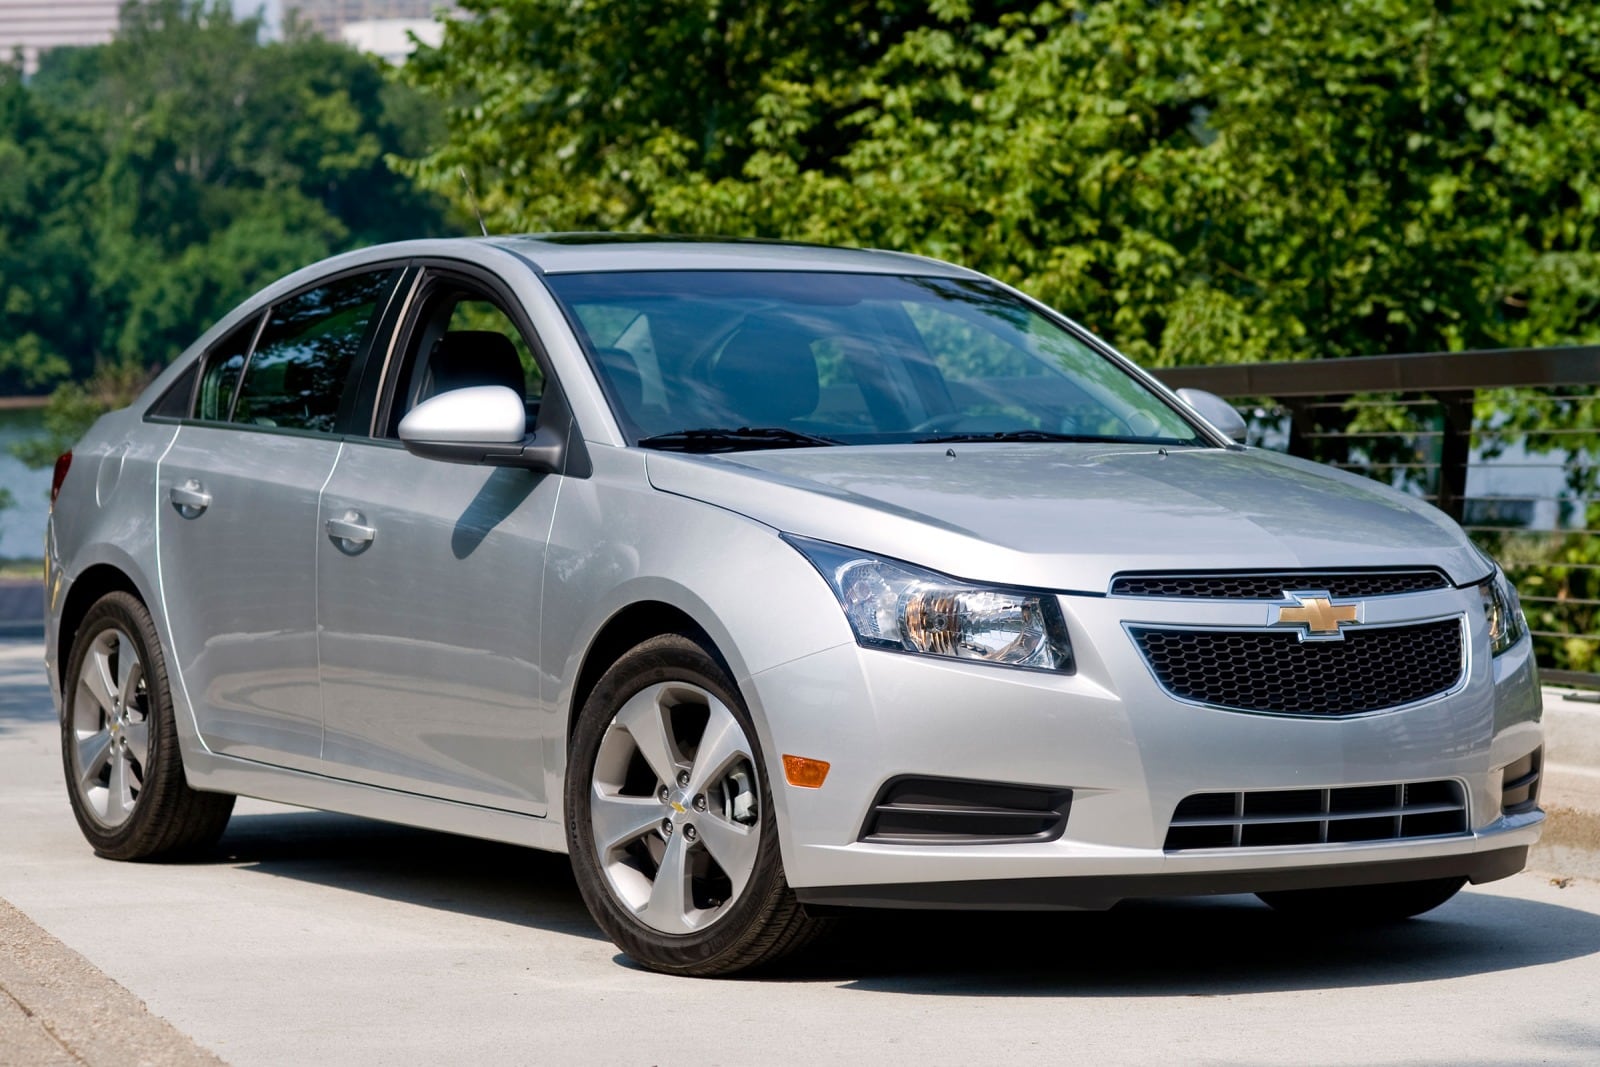 Service Traction Control Chevy Cruze Meaning